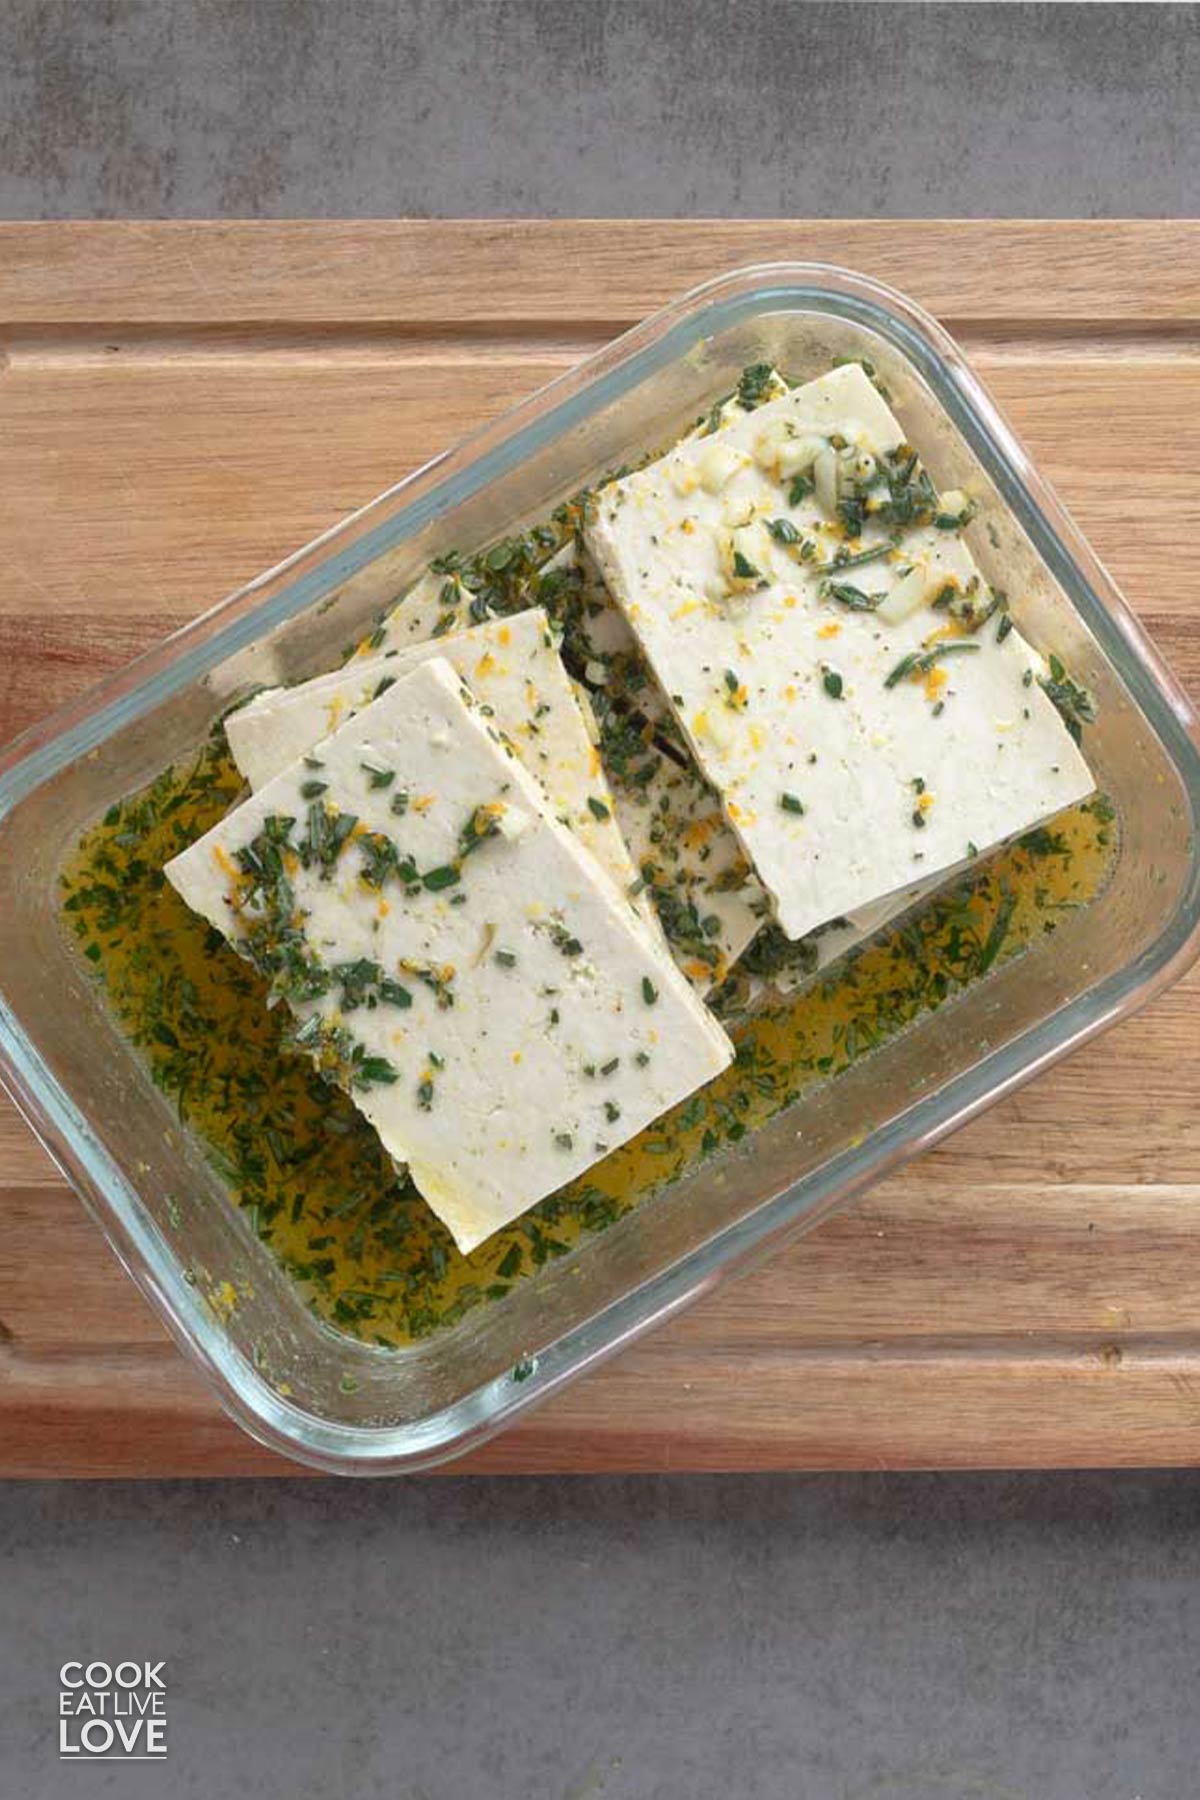 Sliced tofu in a glass dish with marinade poured over it.